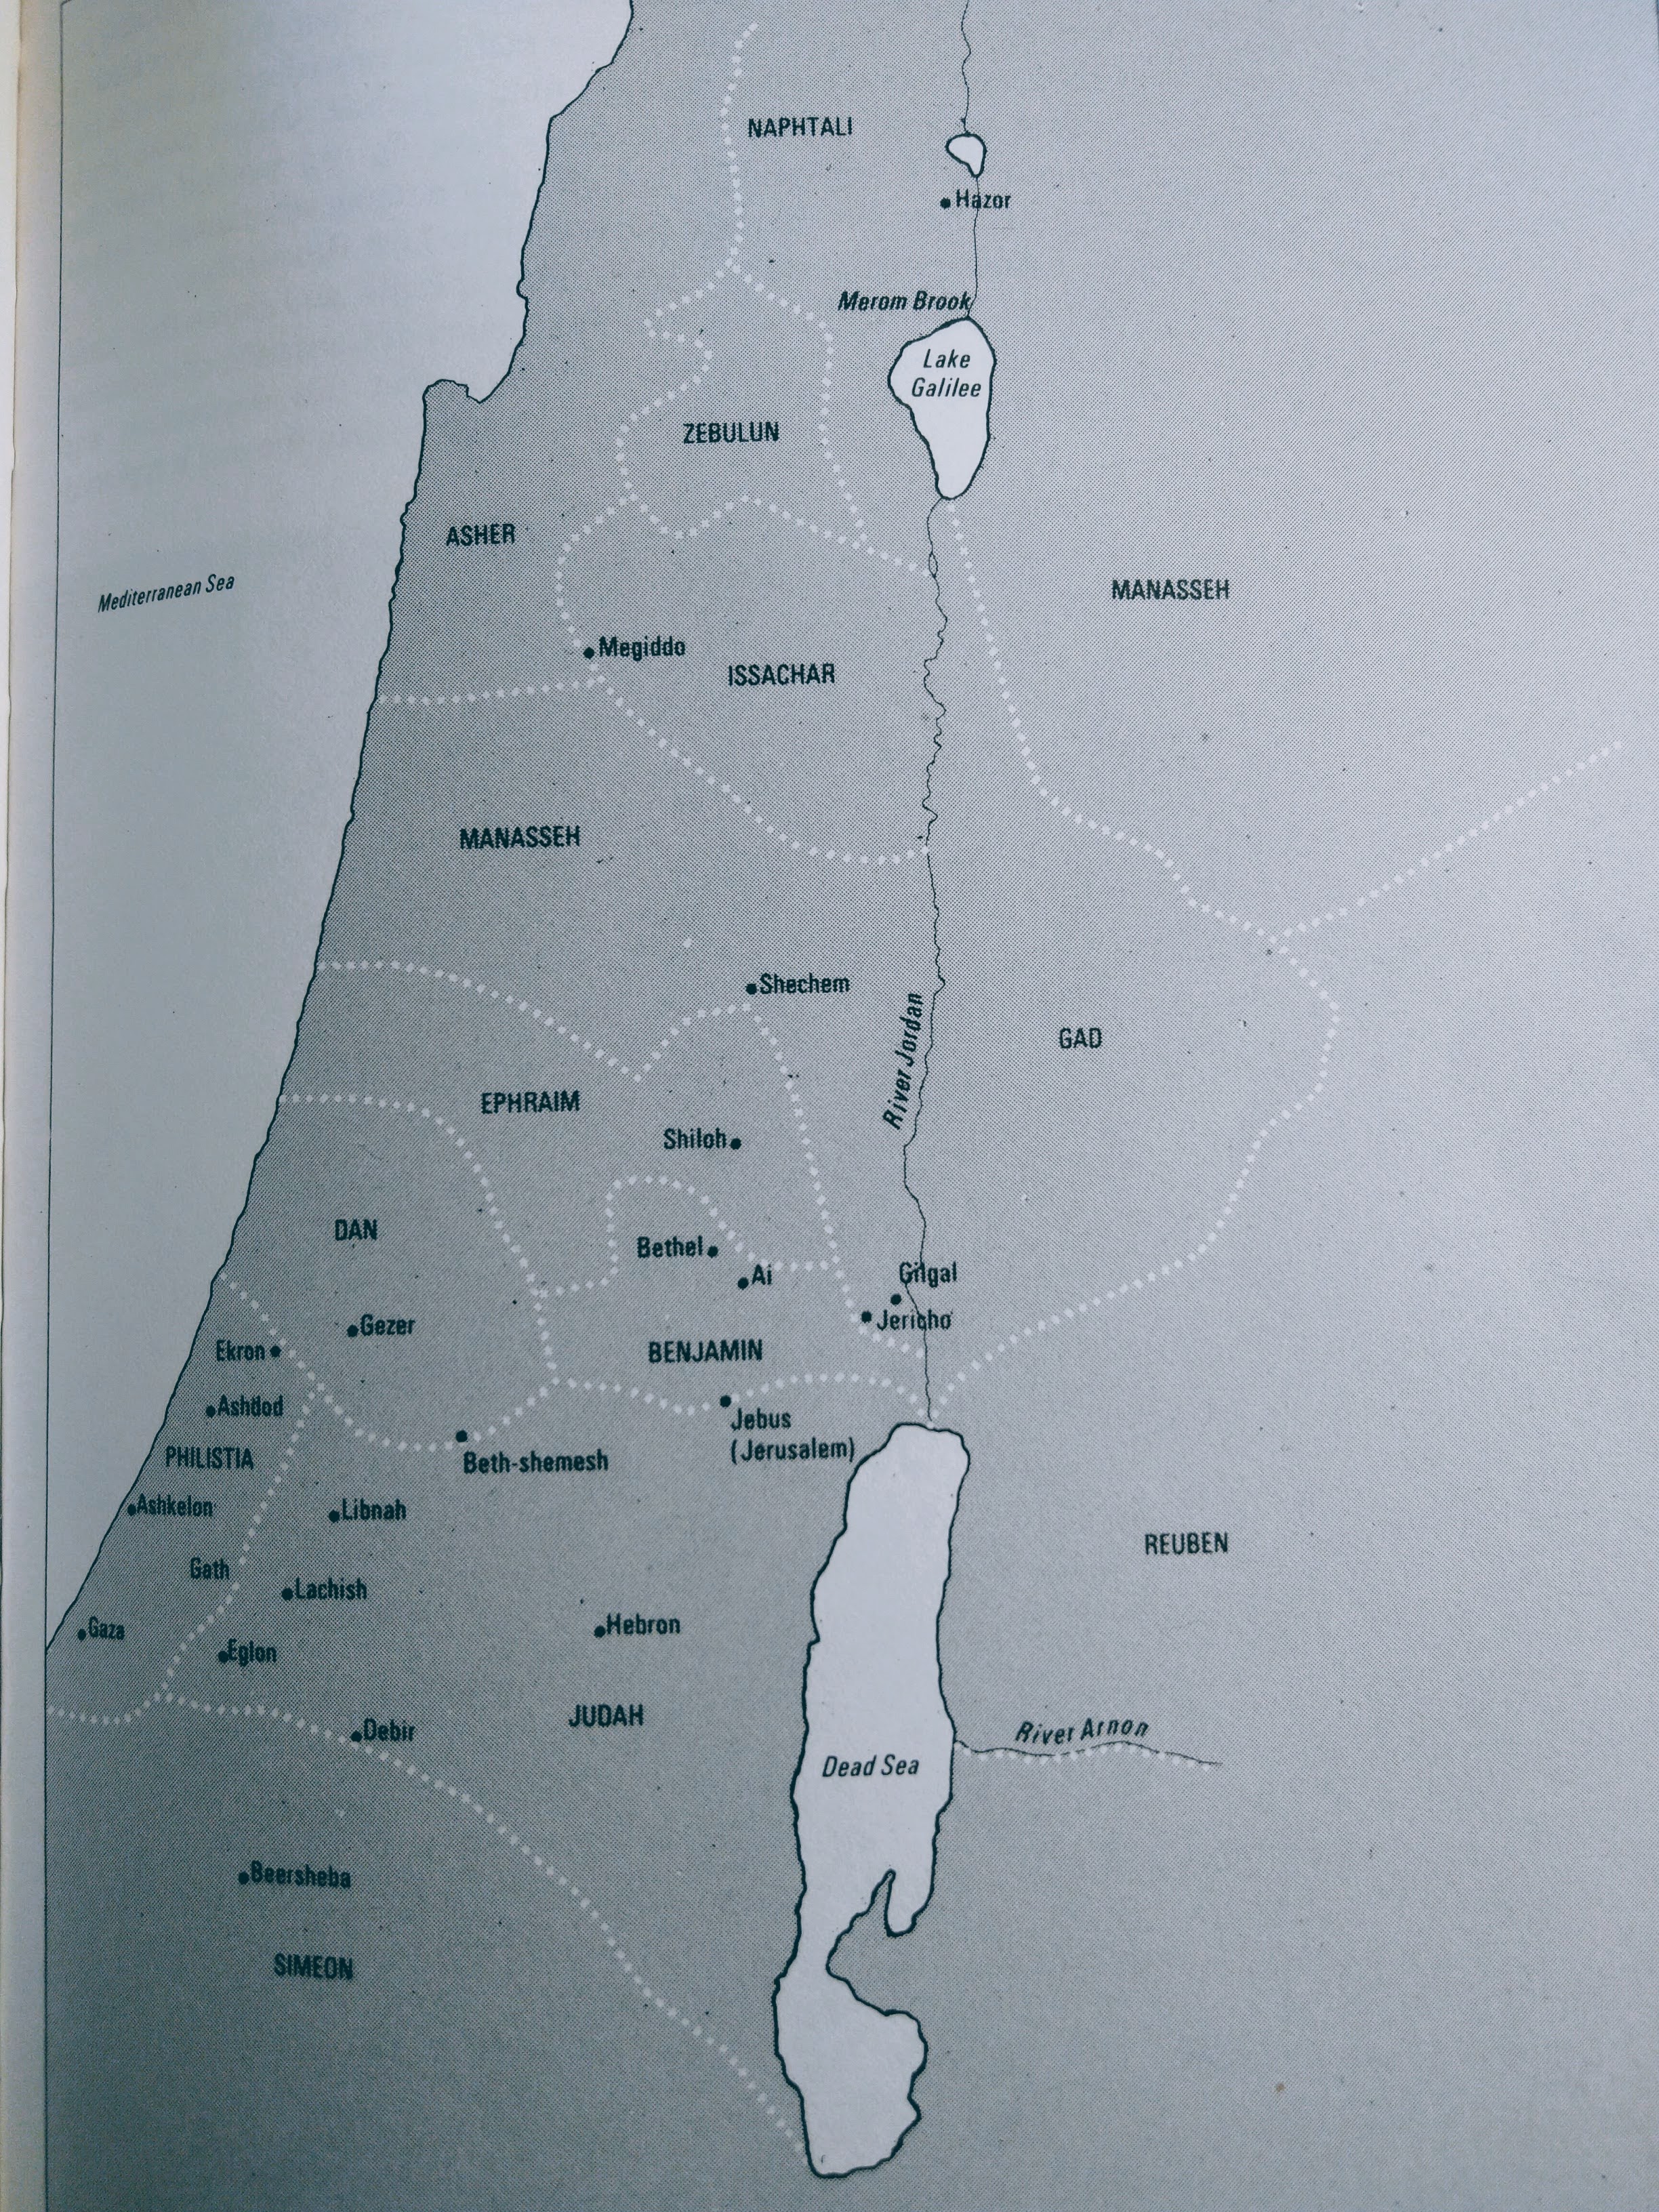 Tribes of Israel territory